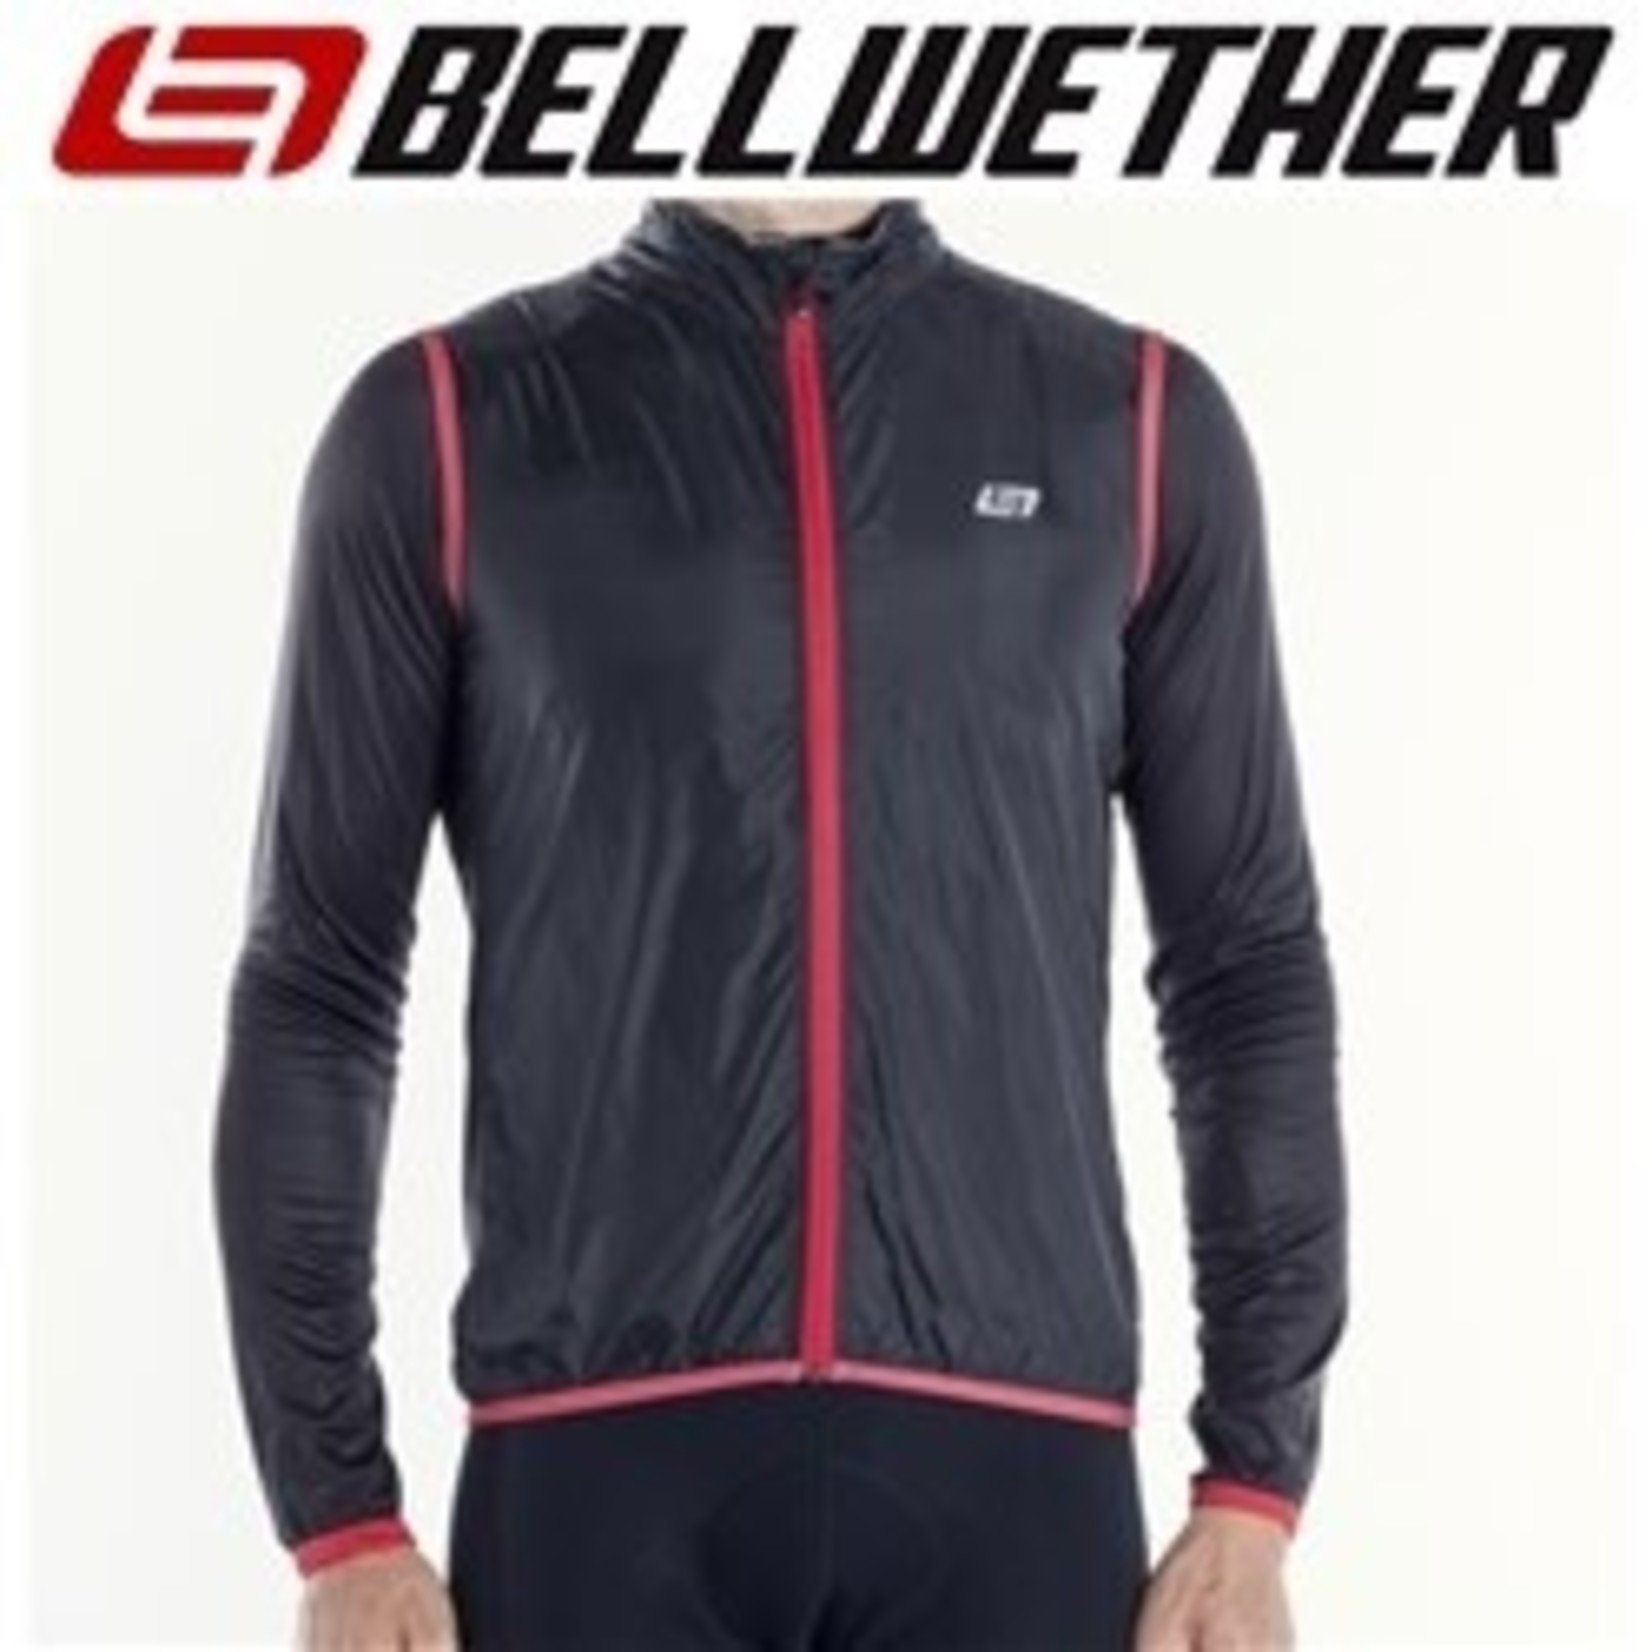 Bellwether Bellwether Cycling Ultralight Vest - Black Windproof  Fabric EXO-Lite